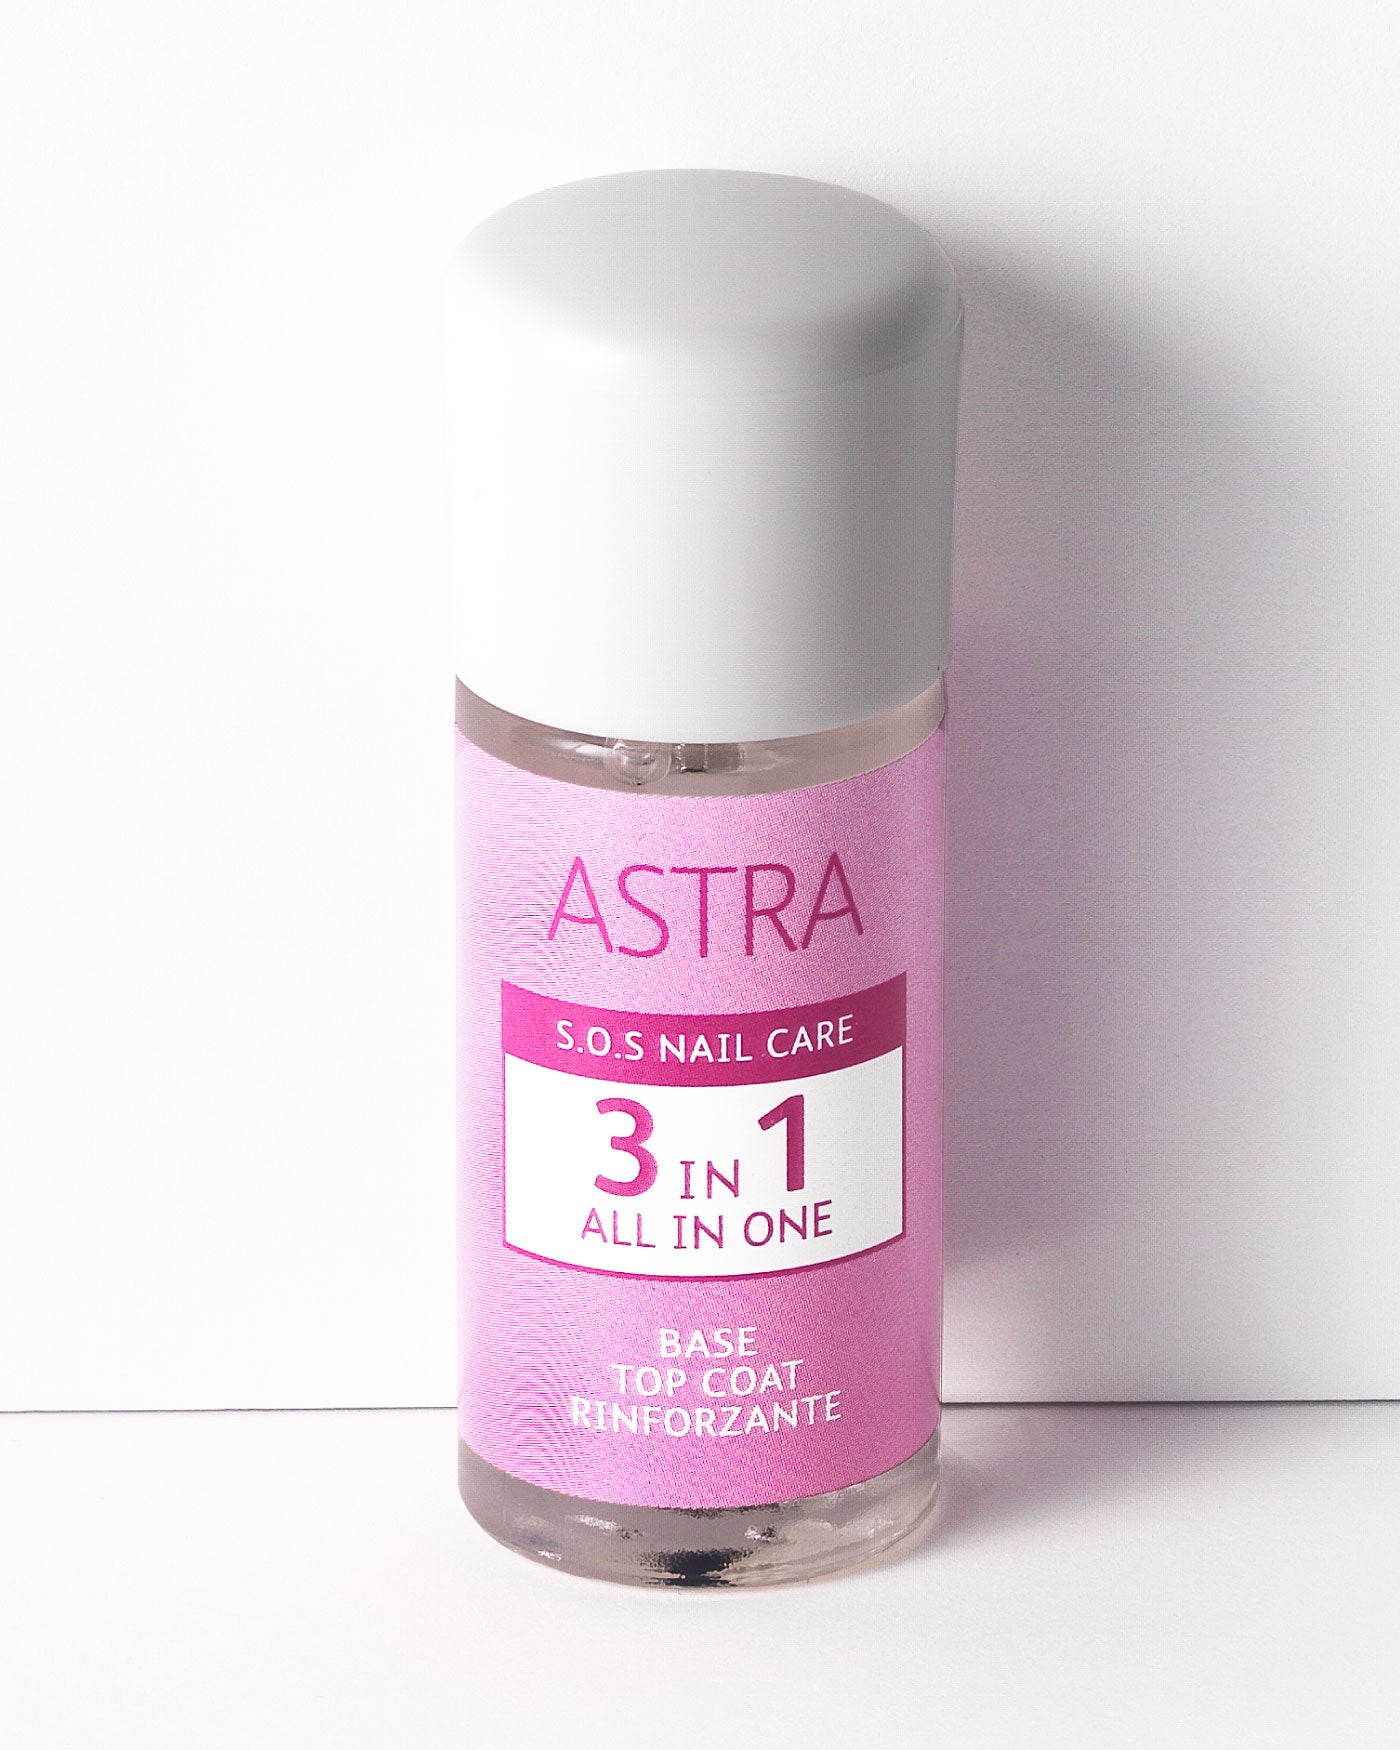 S.O.S NAIL CARE - 3 IN 1 ALL IN ONE - Default Title - Astra Make-Up